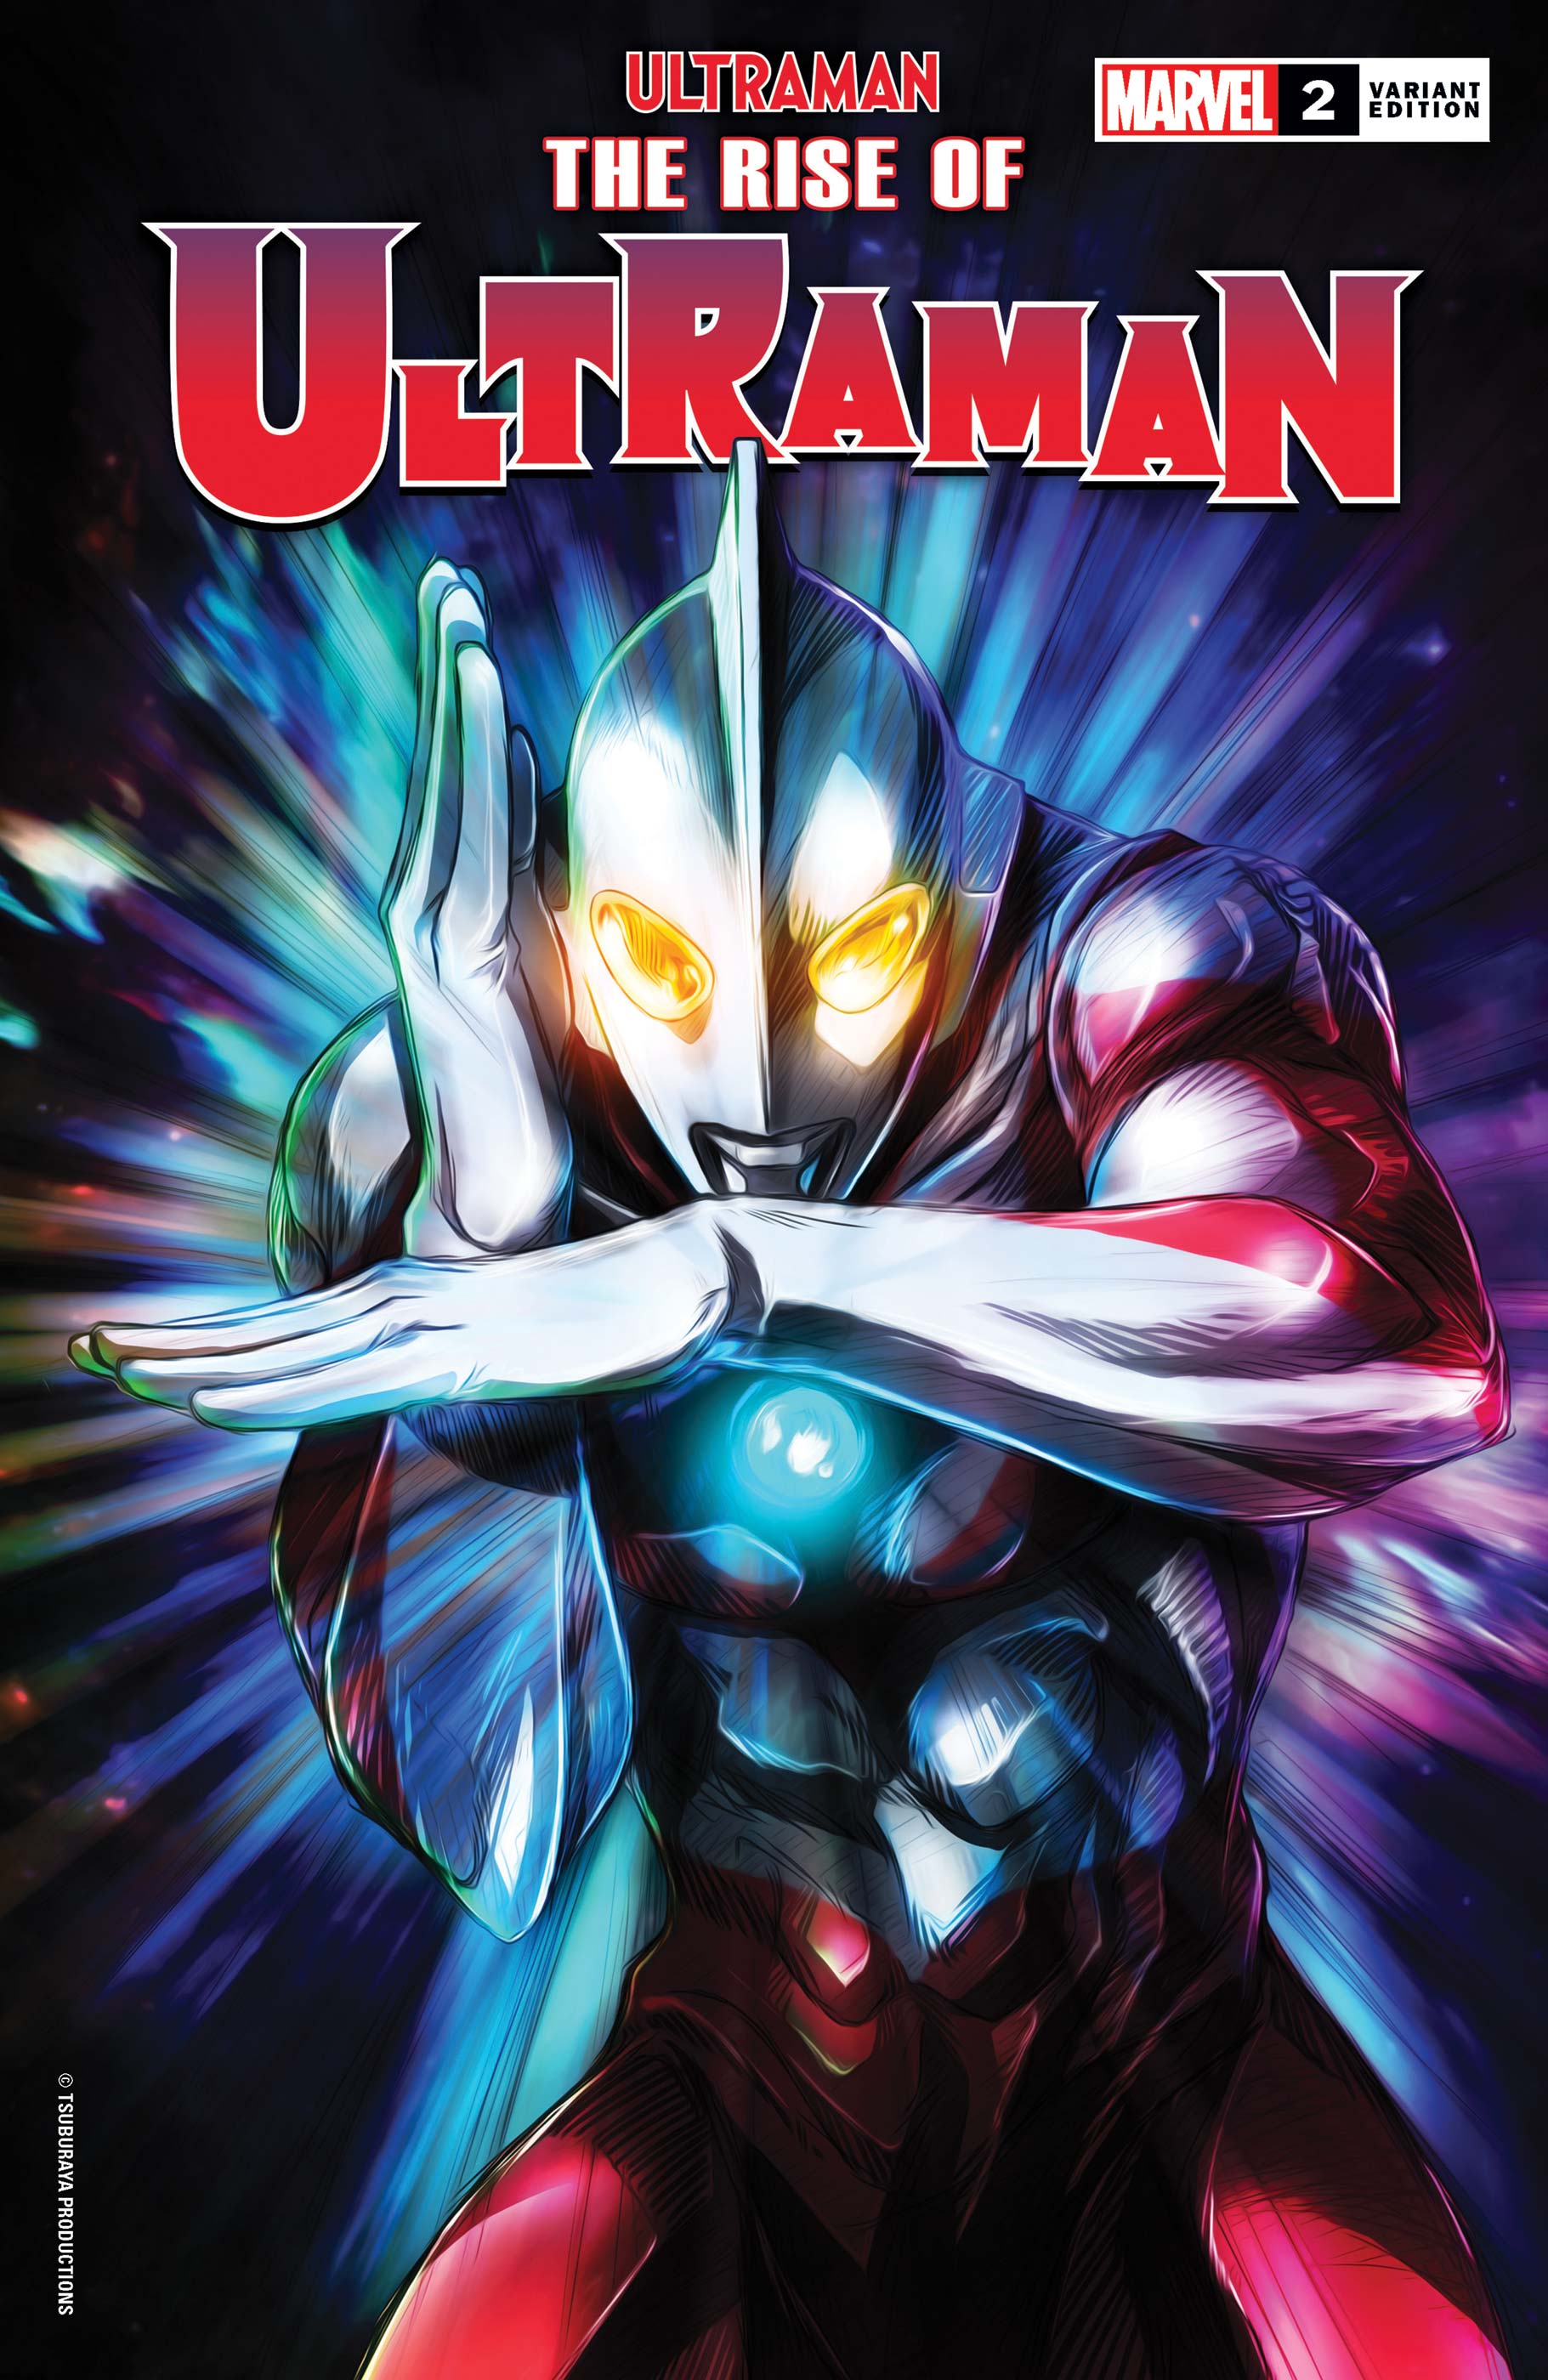 The Rise of Ultraman (2020) #2 (Variant)